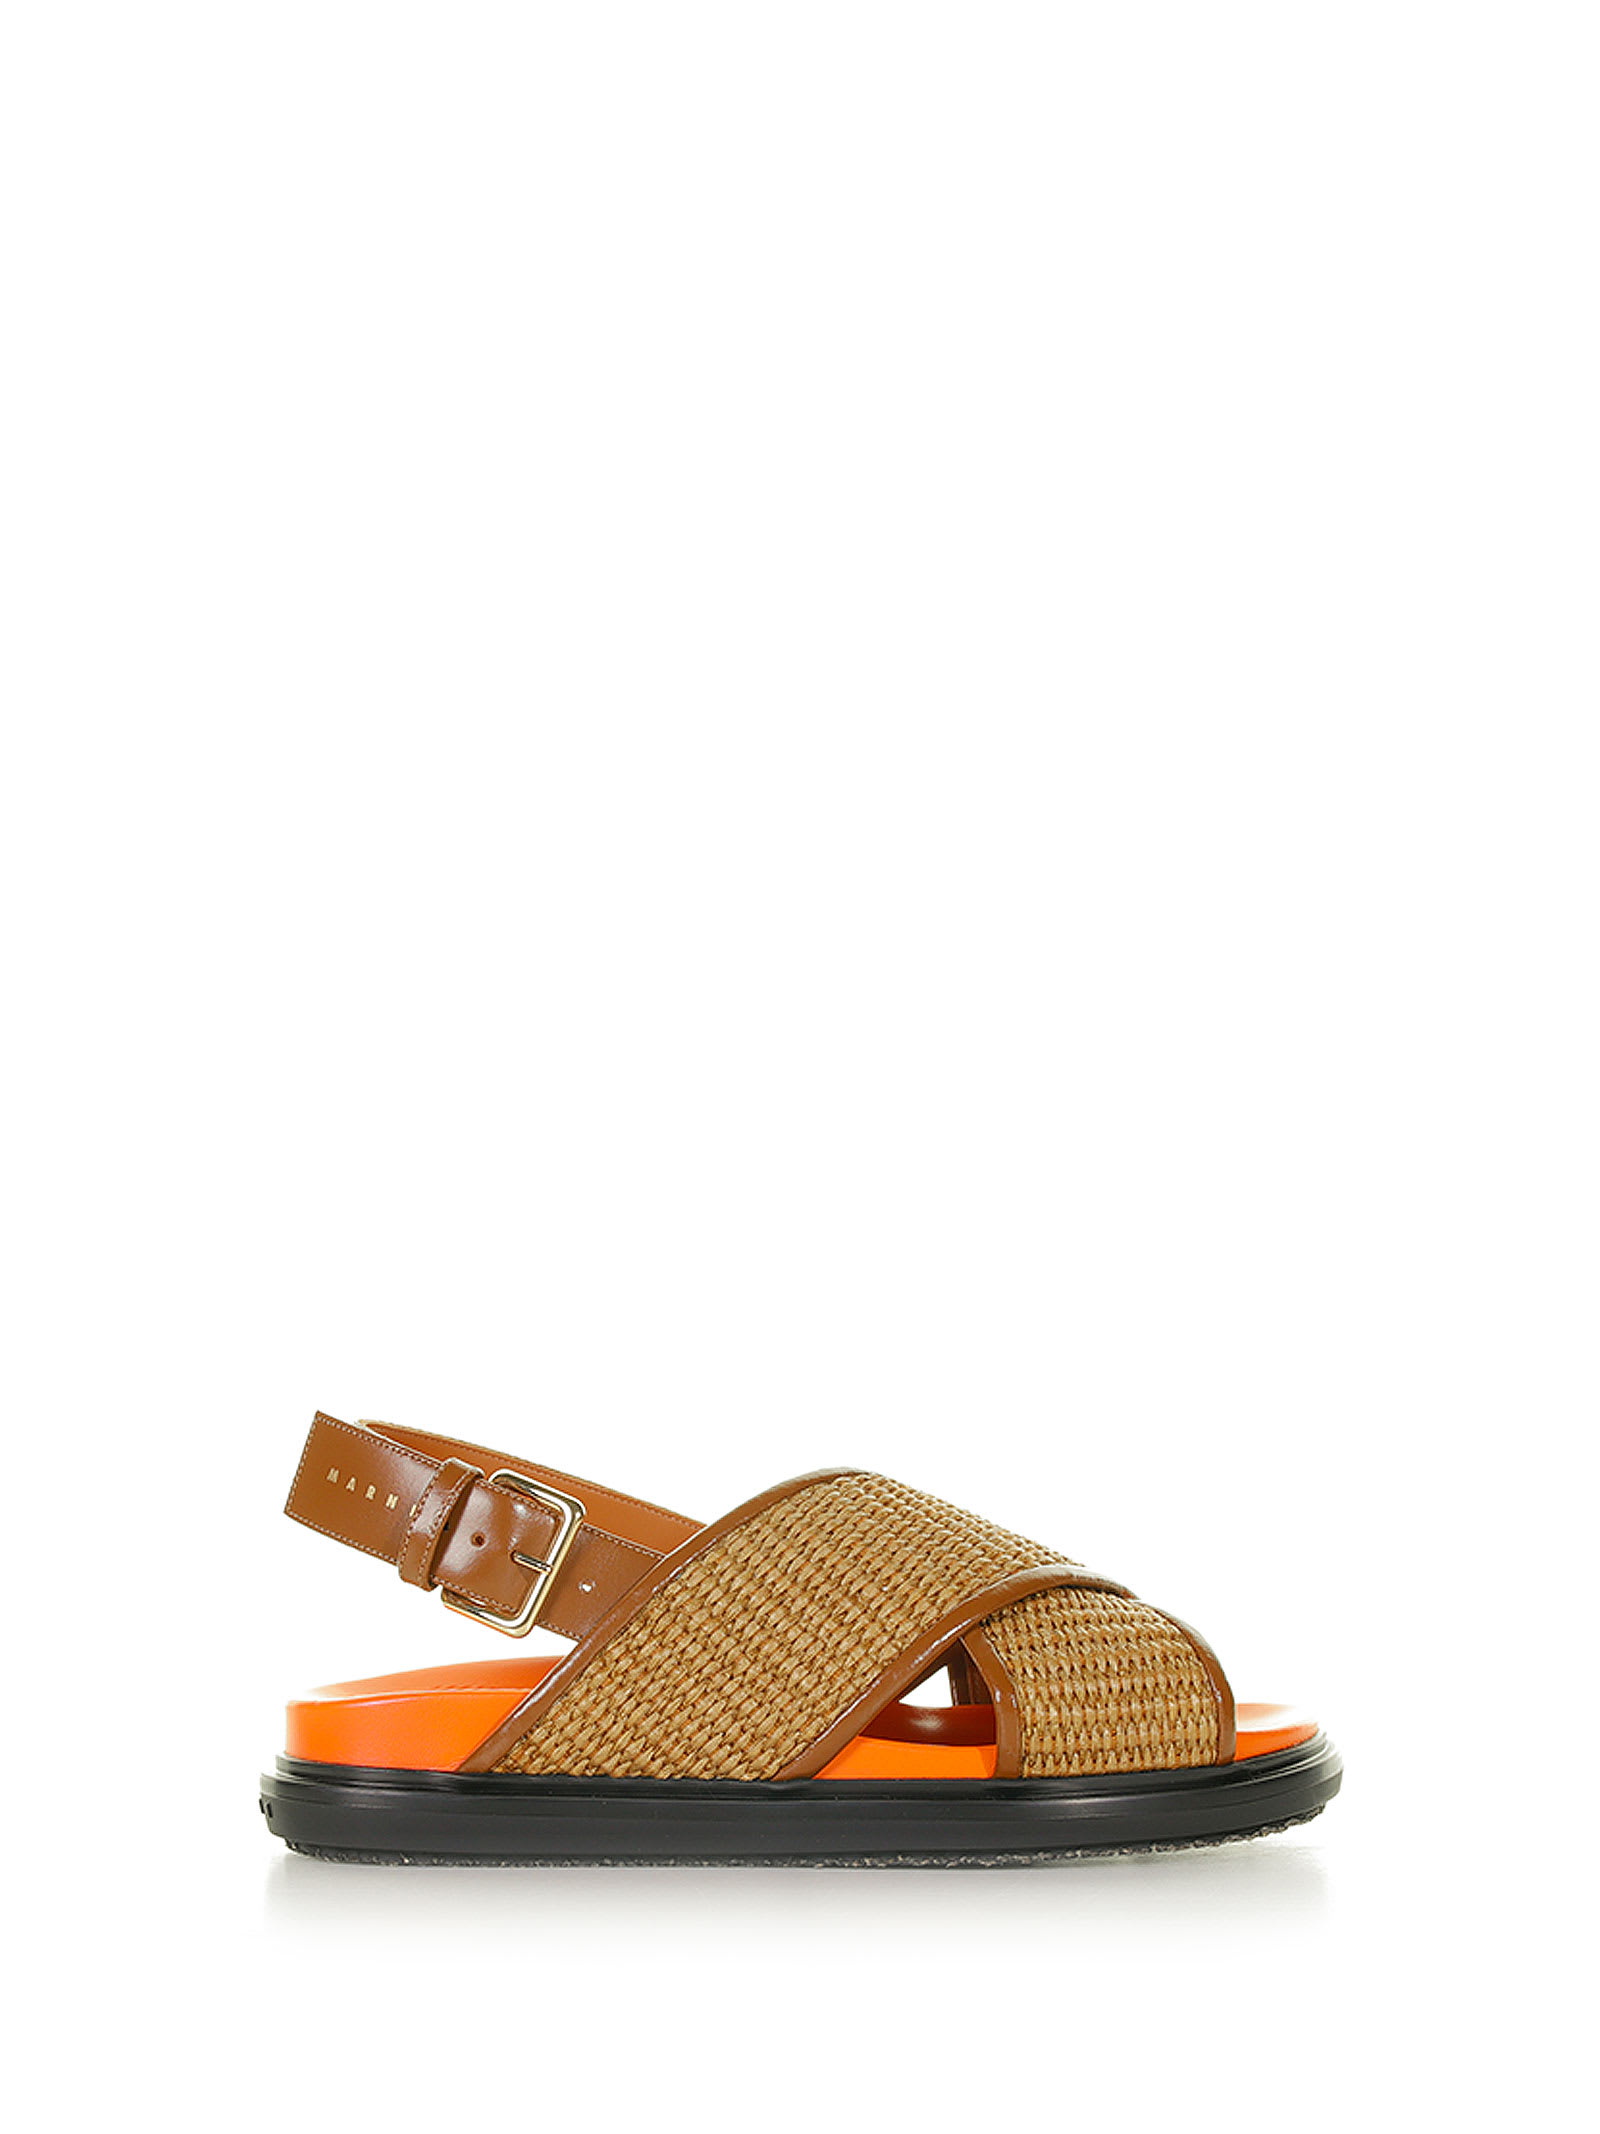 Marni Crossover Fussbett Sandal In Raffia Effect Fabric And Leather - 0RAW SIENA/DUST APRICOT - female - Size: 35